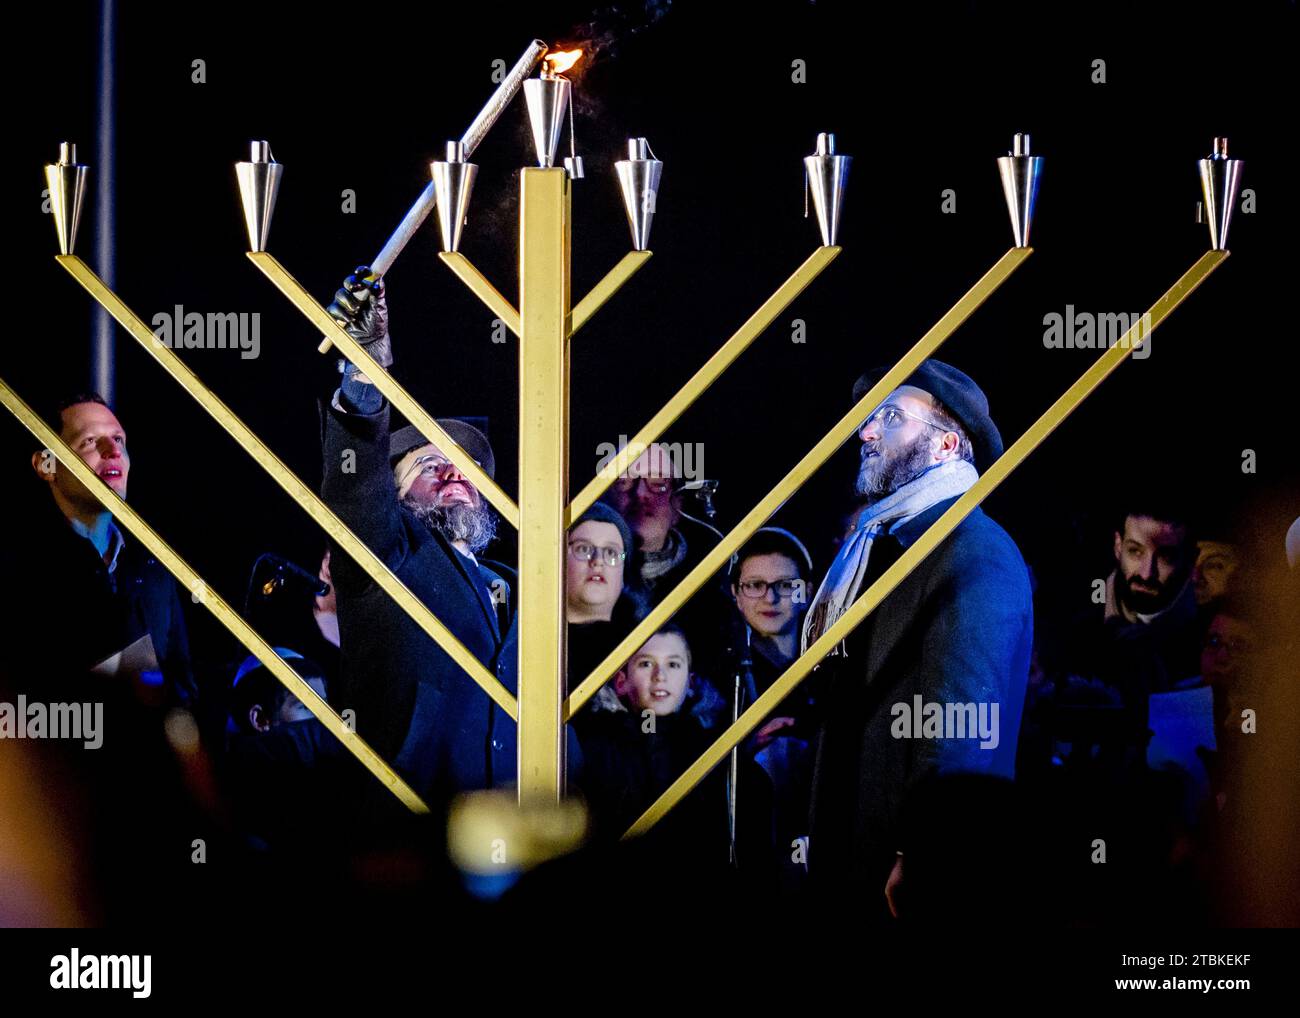 AMSTERDAM - Atmosphere on Dam Square, which is hosting the national Hanukkah celebration for the seventeenth time. To mark the start of the Jewish festival, a large hanukkiah, a nine-branched candelabra, is lit. ANP REMKO DE WAAL netherlands out - belgium out Stock Photo